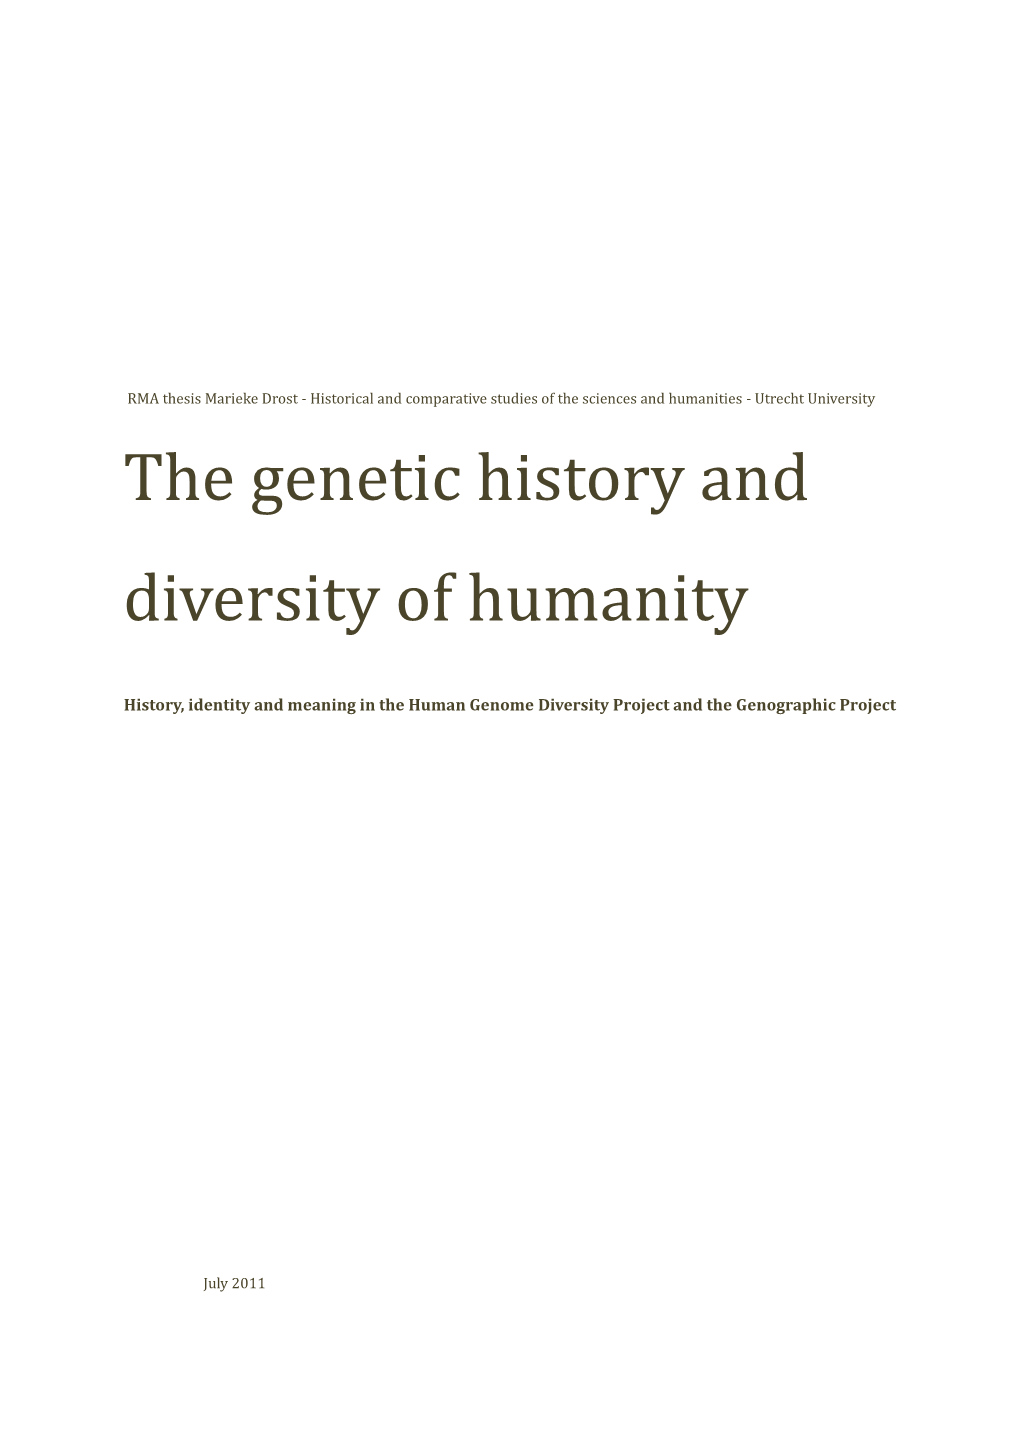 The Genetic History and Diversity of Humanity